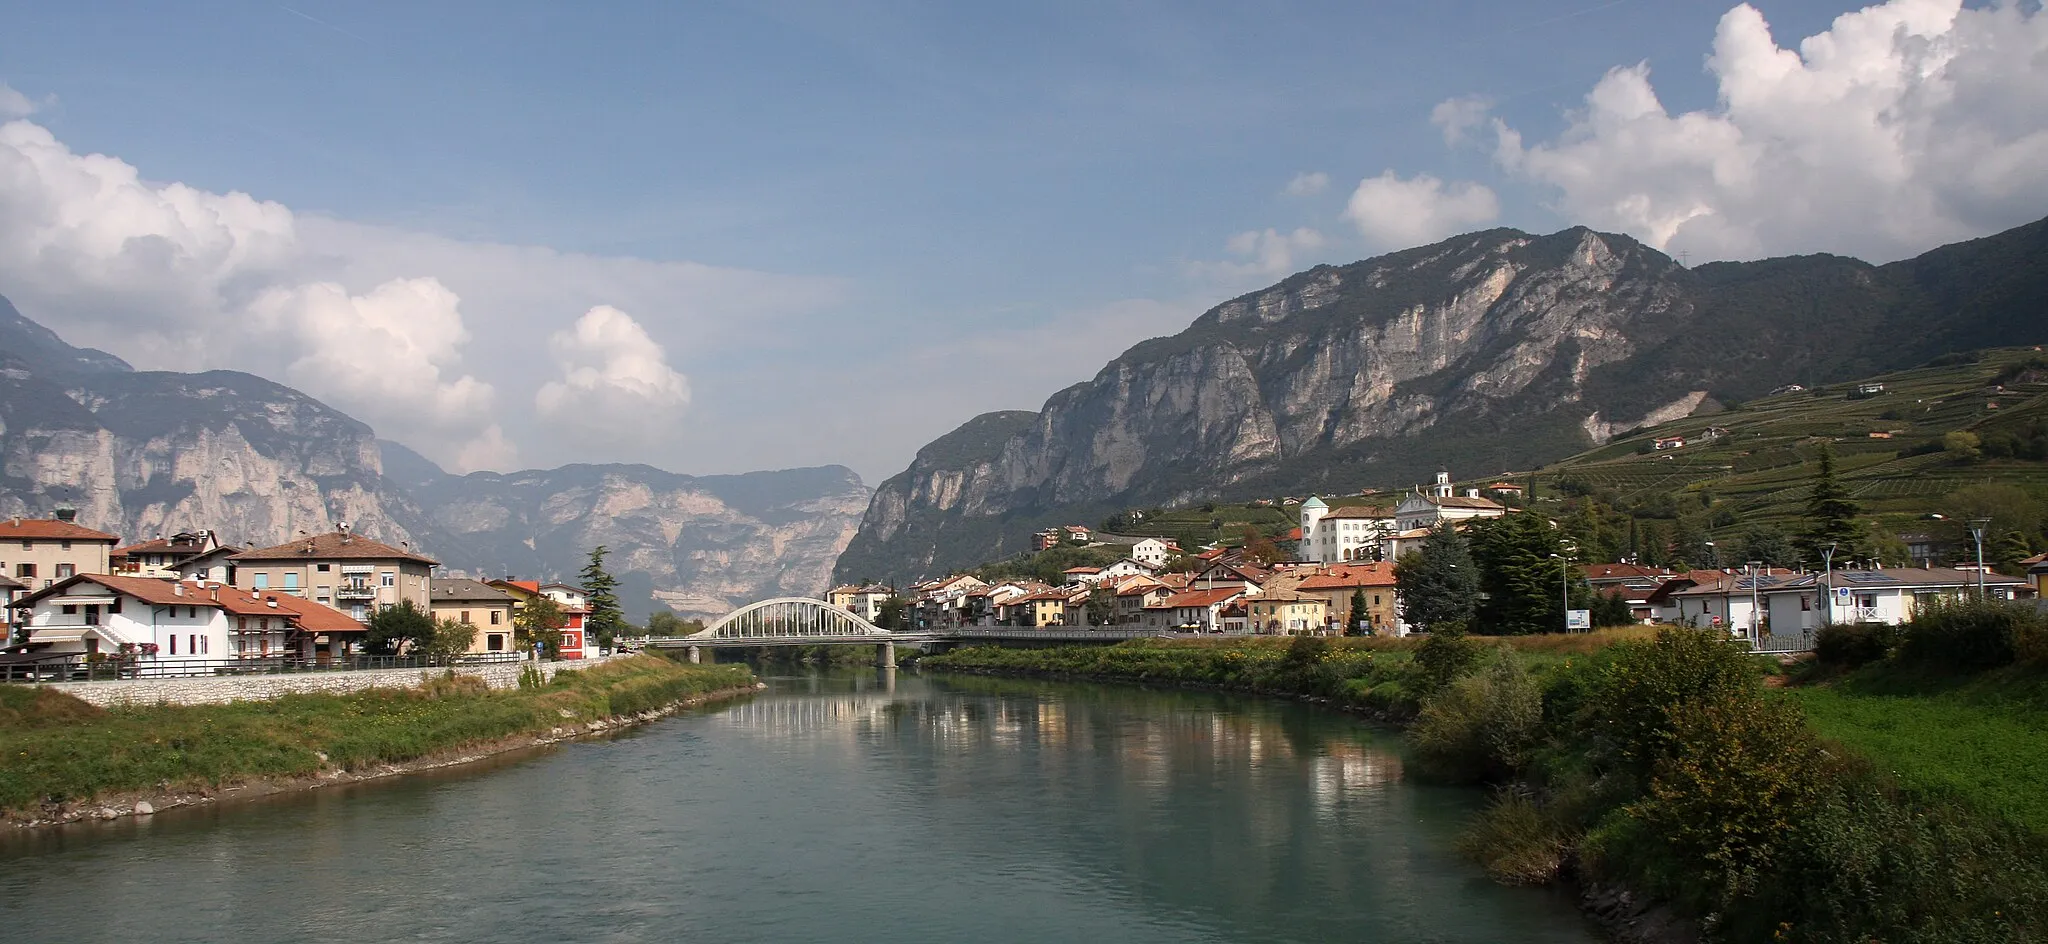 Photo showing: The town of en:San Michele all'Adige (TN), Italy, view from the south taken from the new pedestrian bridge over the Adige river. On the left side (right bank) of the river is frazione Grumo, while on the opposite side is San Michele proper.